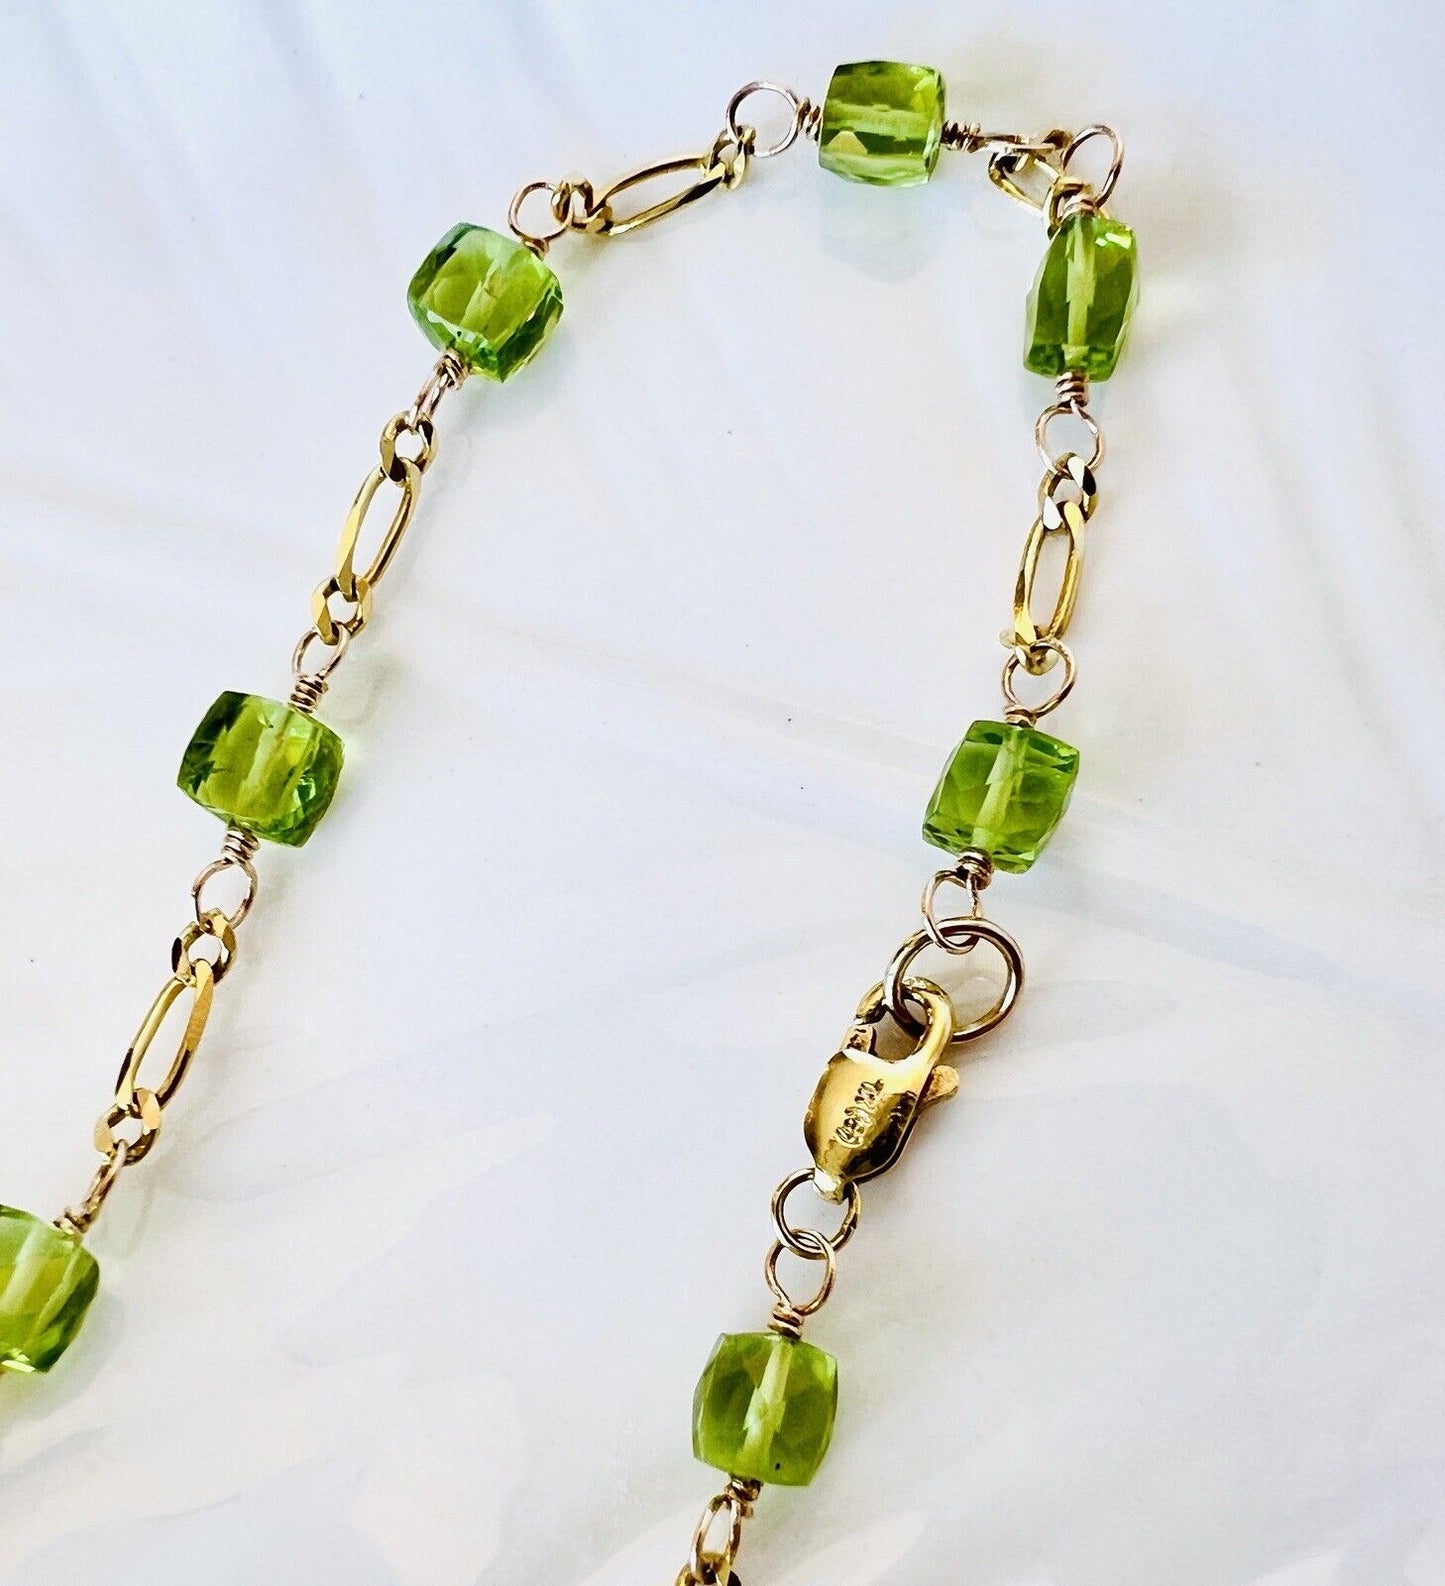 Solid 14k Yellow Gold Genuine Peridot Cube Station Chain Necklace, New 16.75”